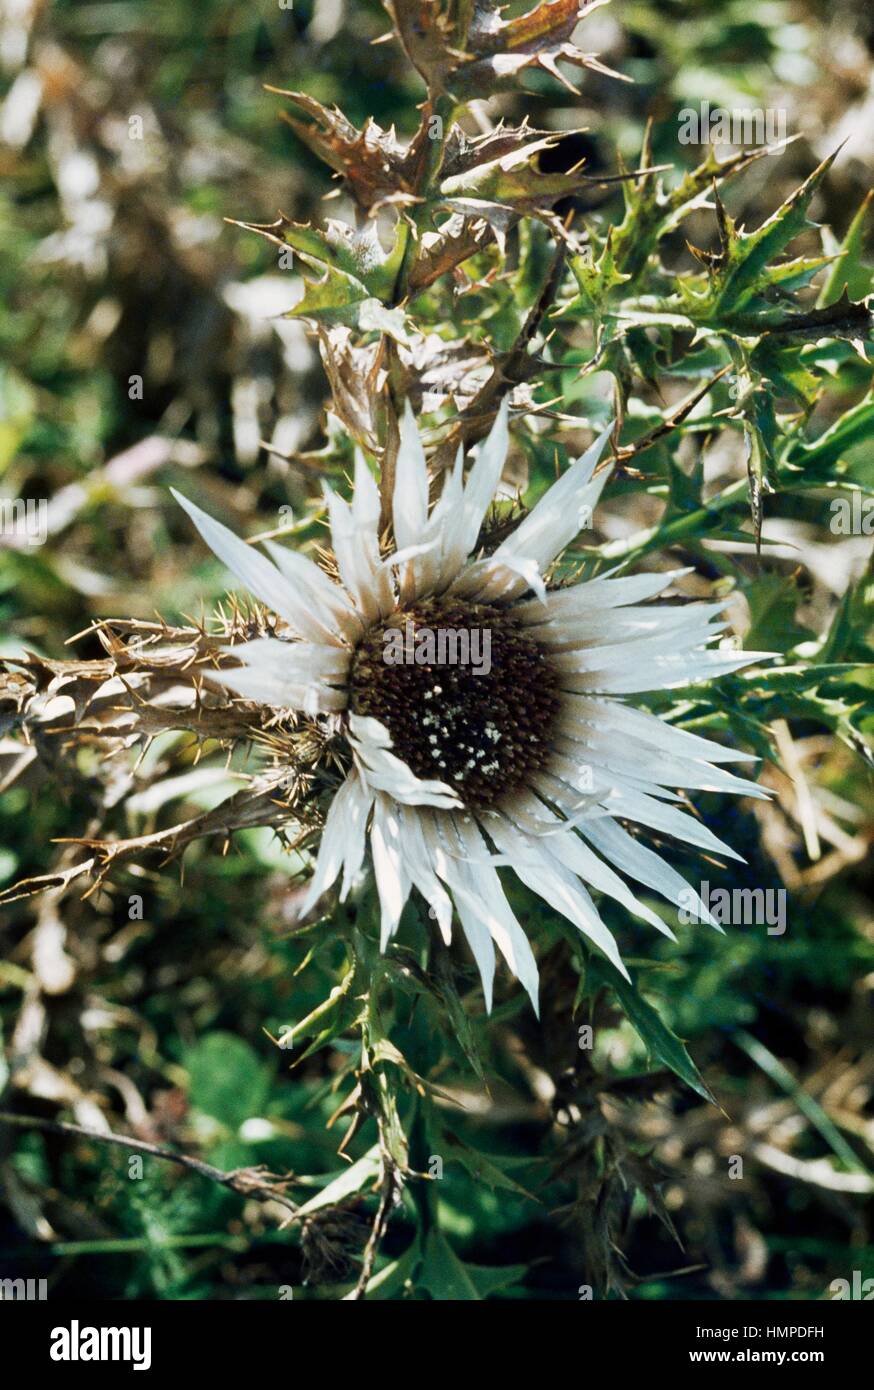 Stemless carline thistle, Dwarf carline thistle or Silver thistle (Carlina acaulis), Asteraceae. Stock Photo